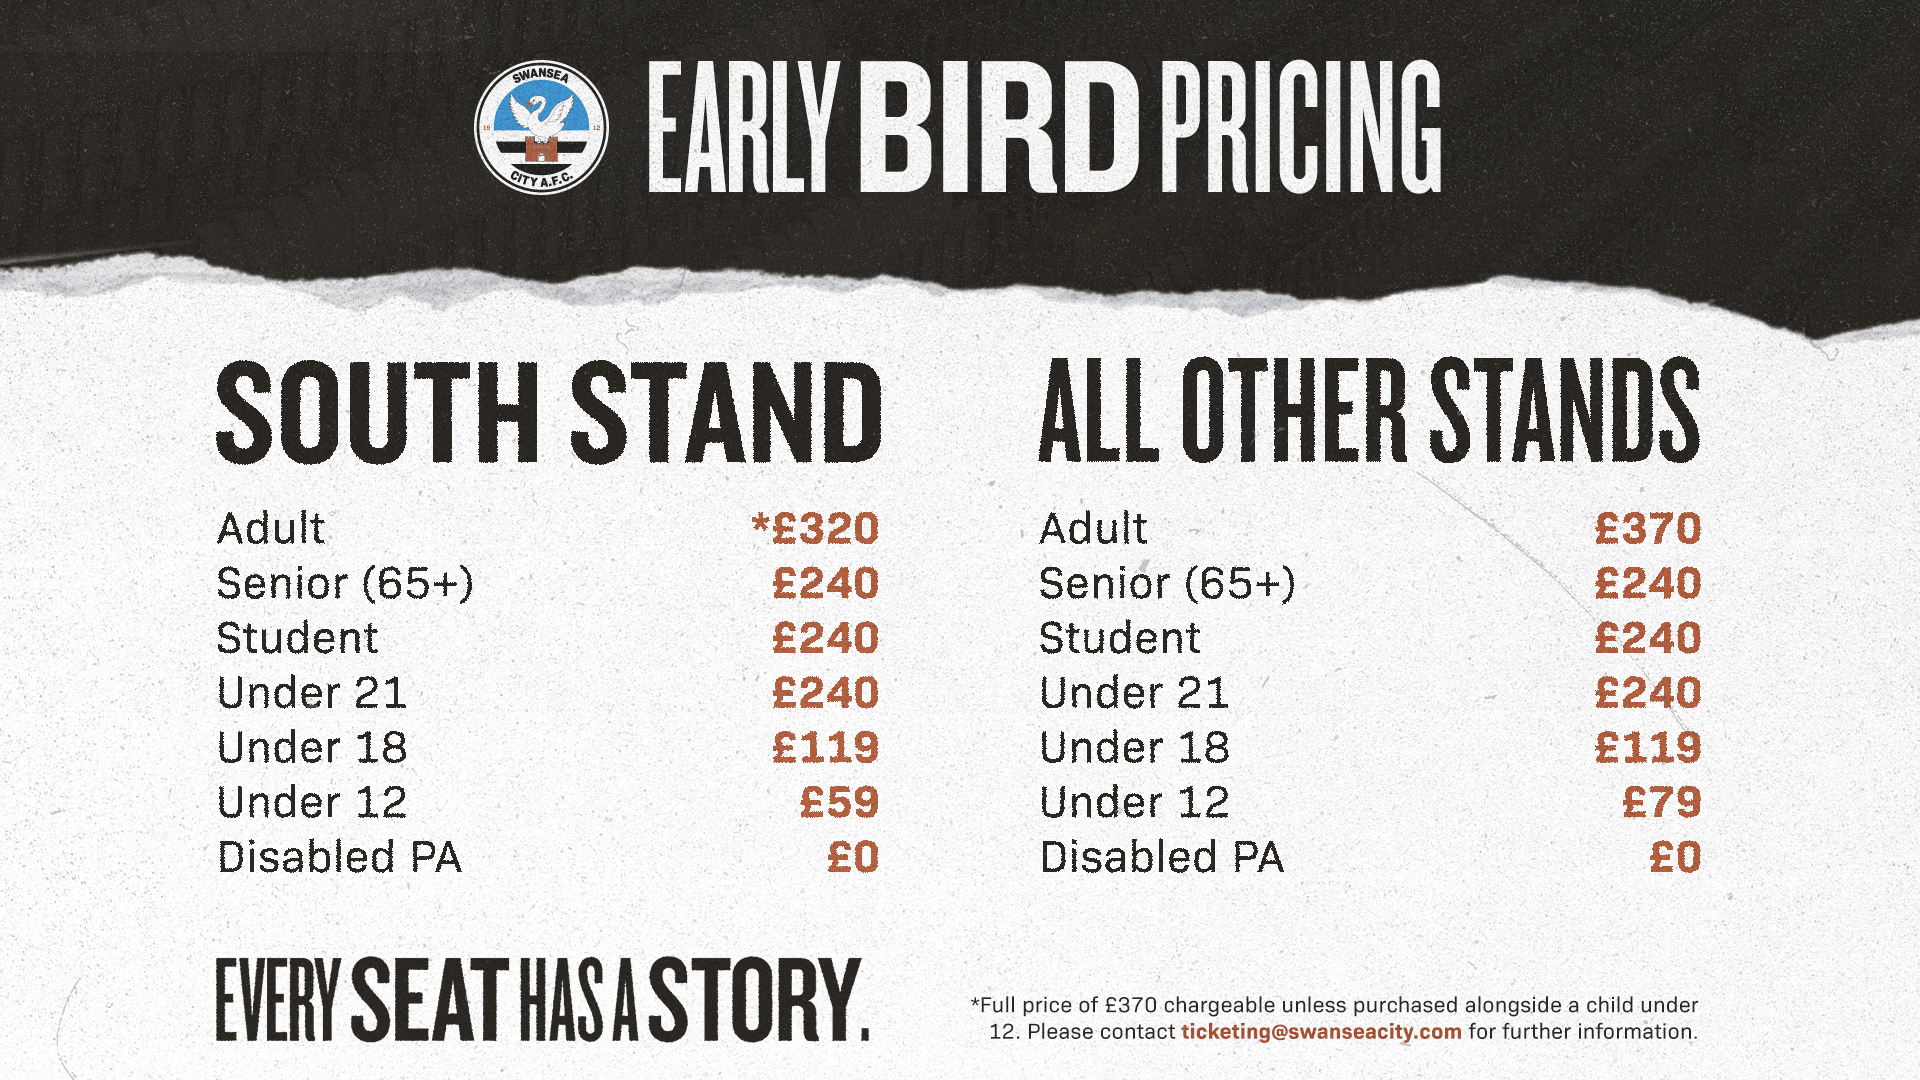 Early bird pricing details for the 23-24 season